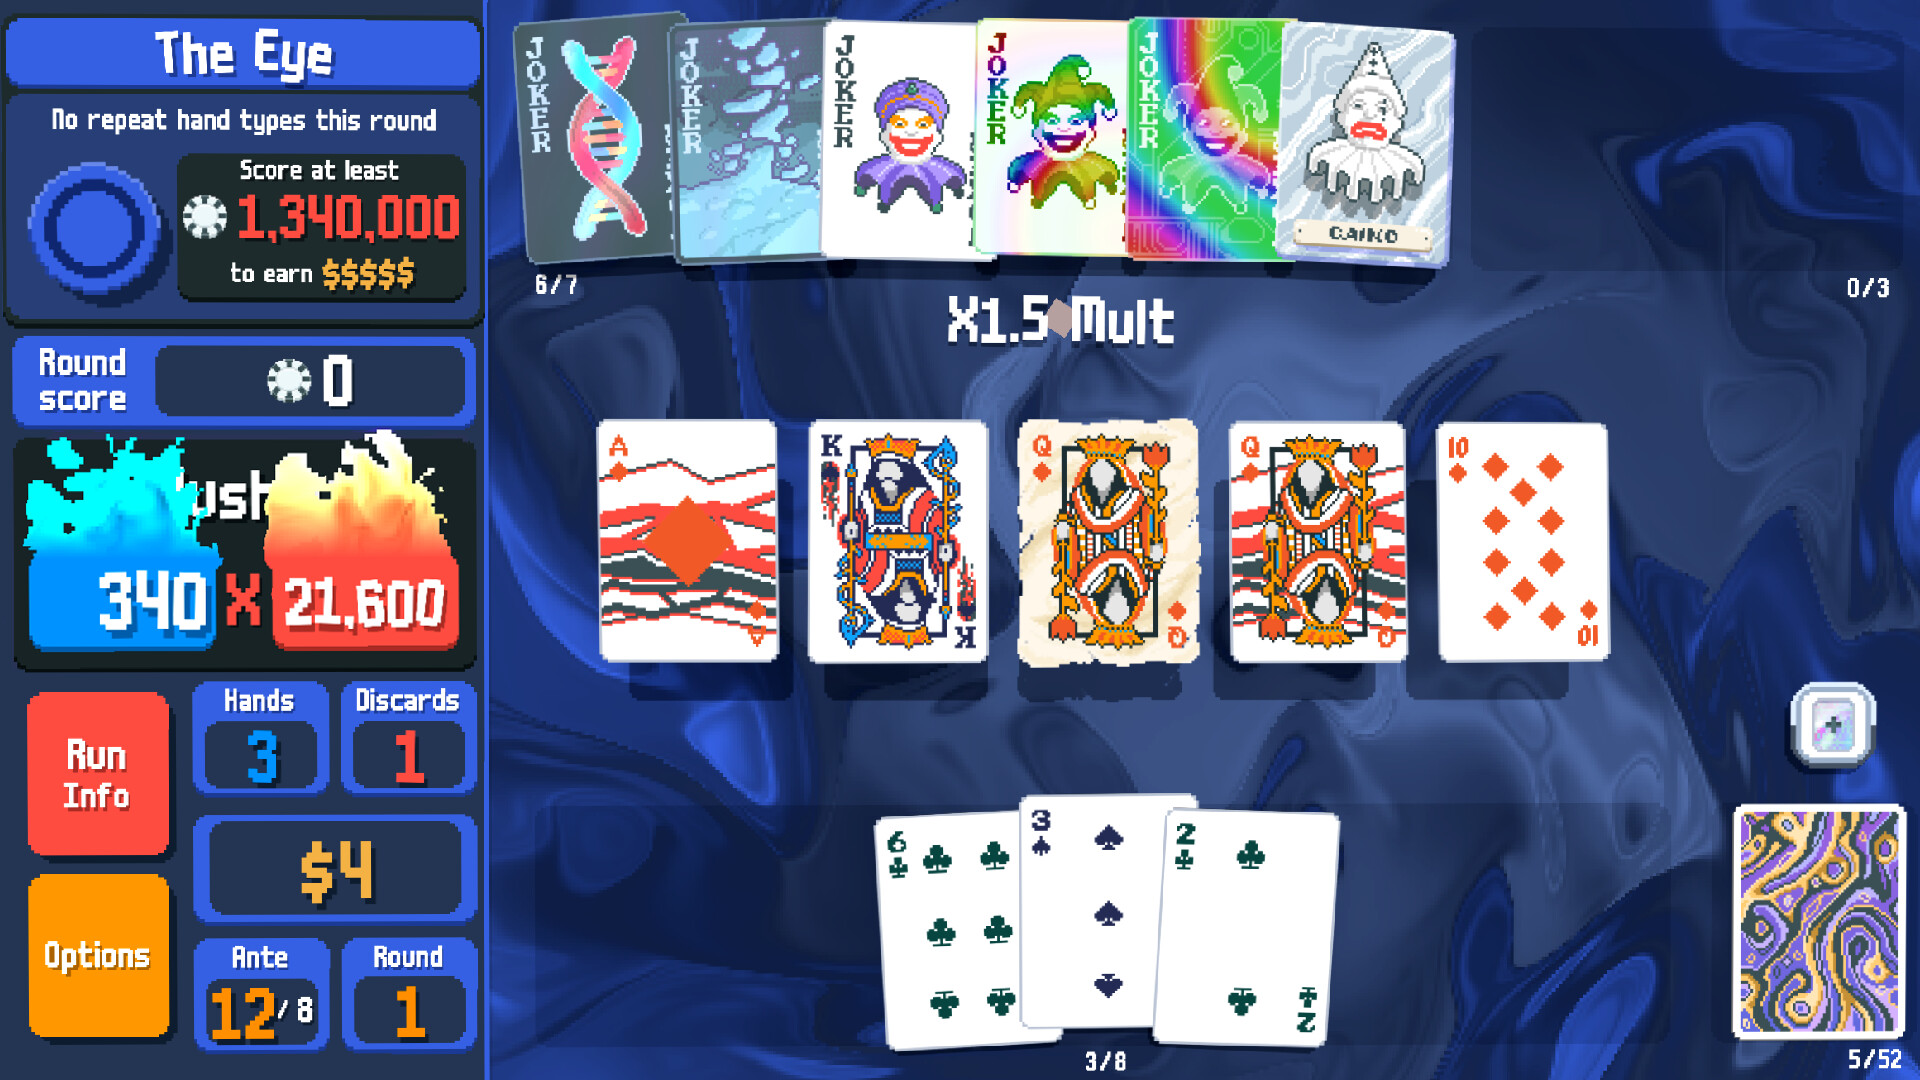 A screenshot from the game Balatro: rows of playing cards on a blue background